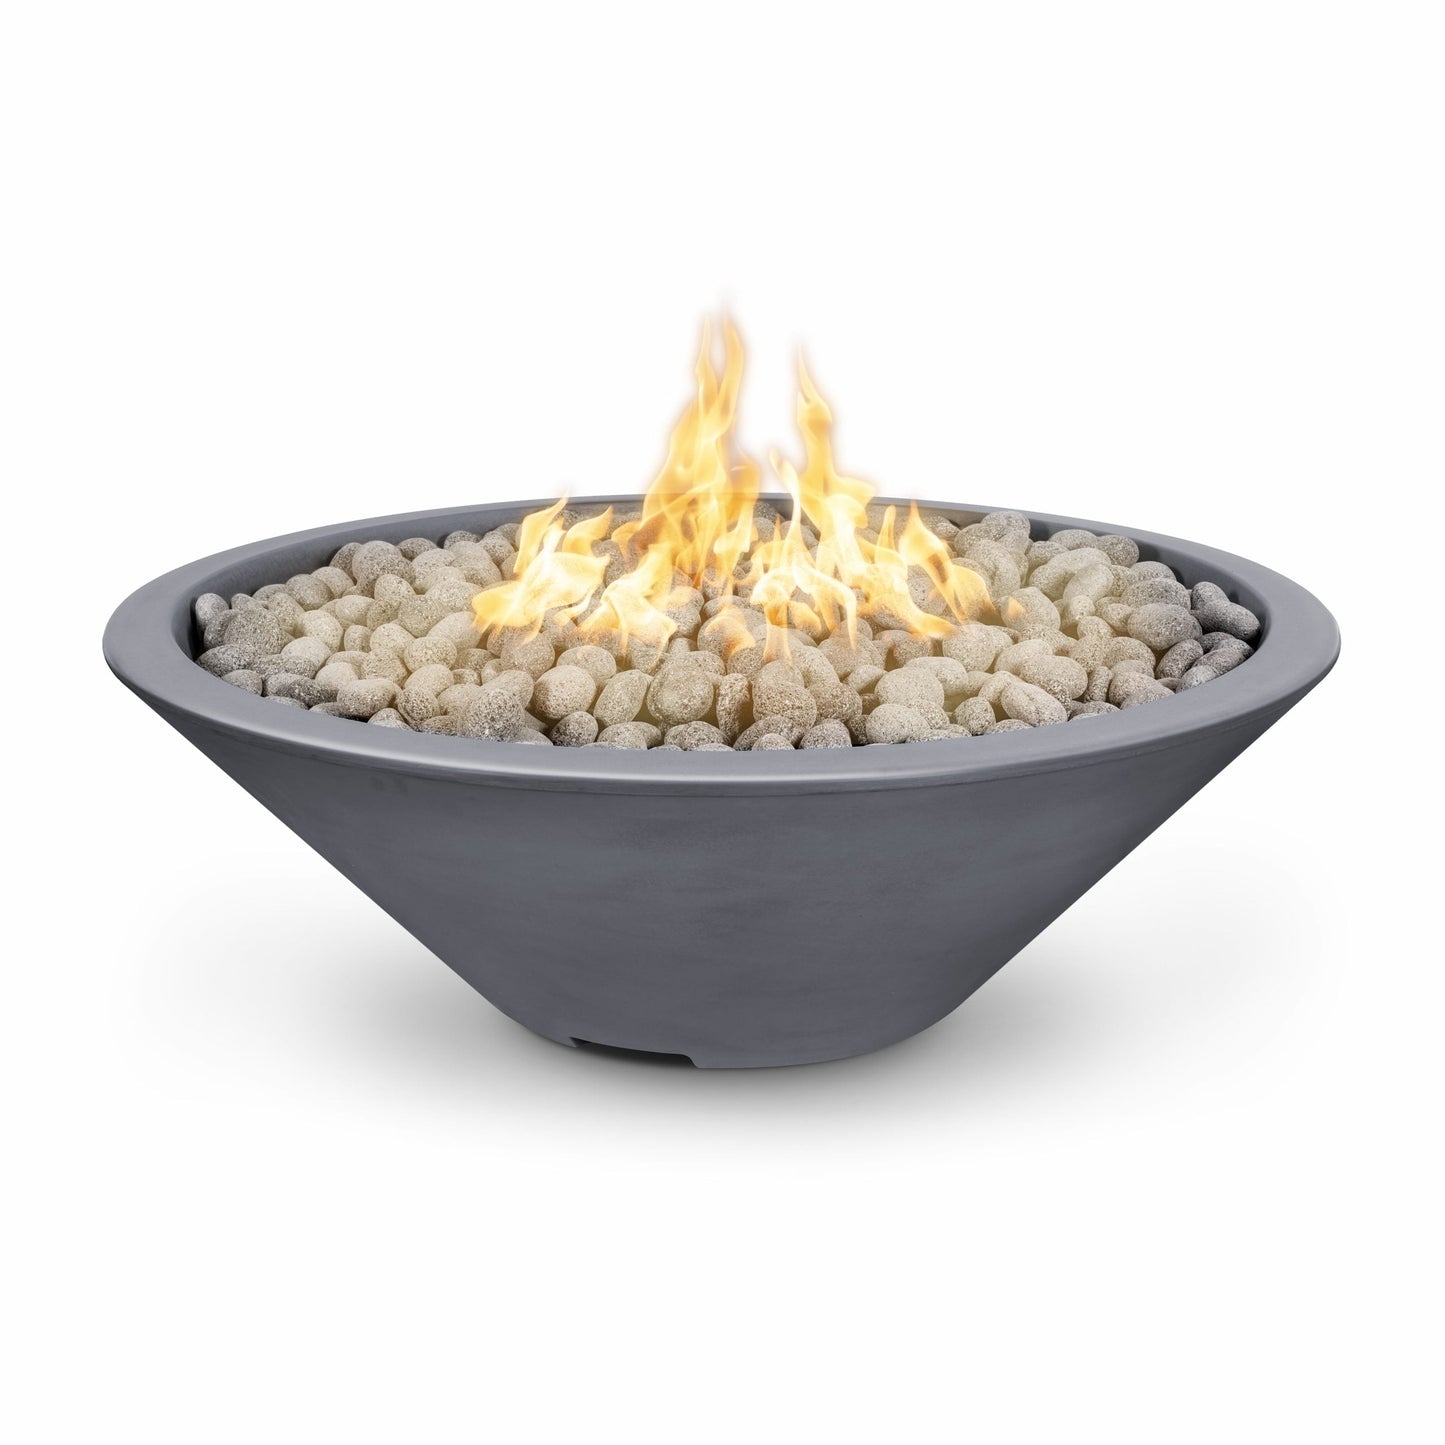 The Outdoor Plus Round Cazo 48" Java Powder Coated Metal Liquid Propane Fire Pit with Match Lit Ignition